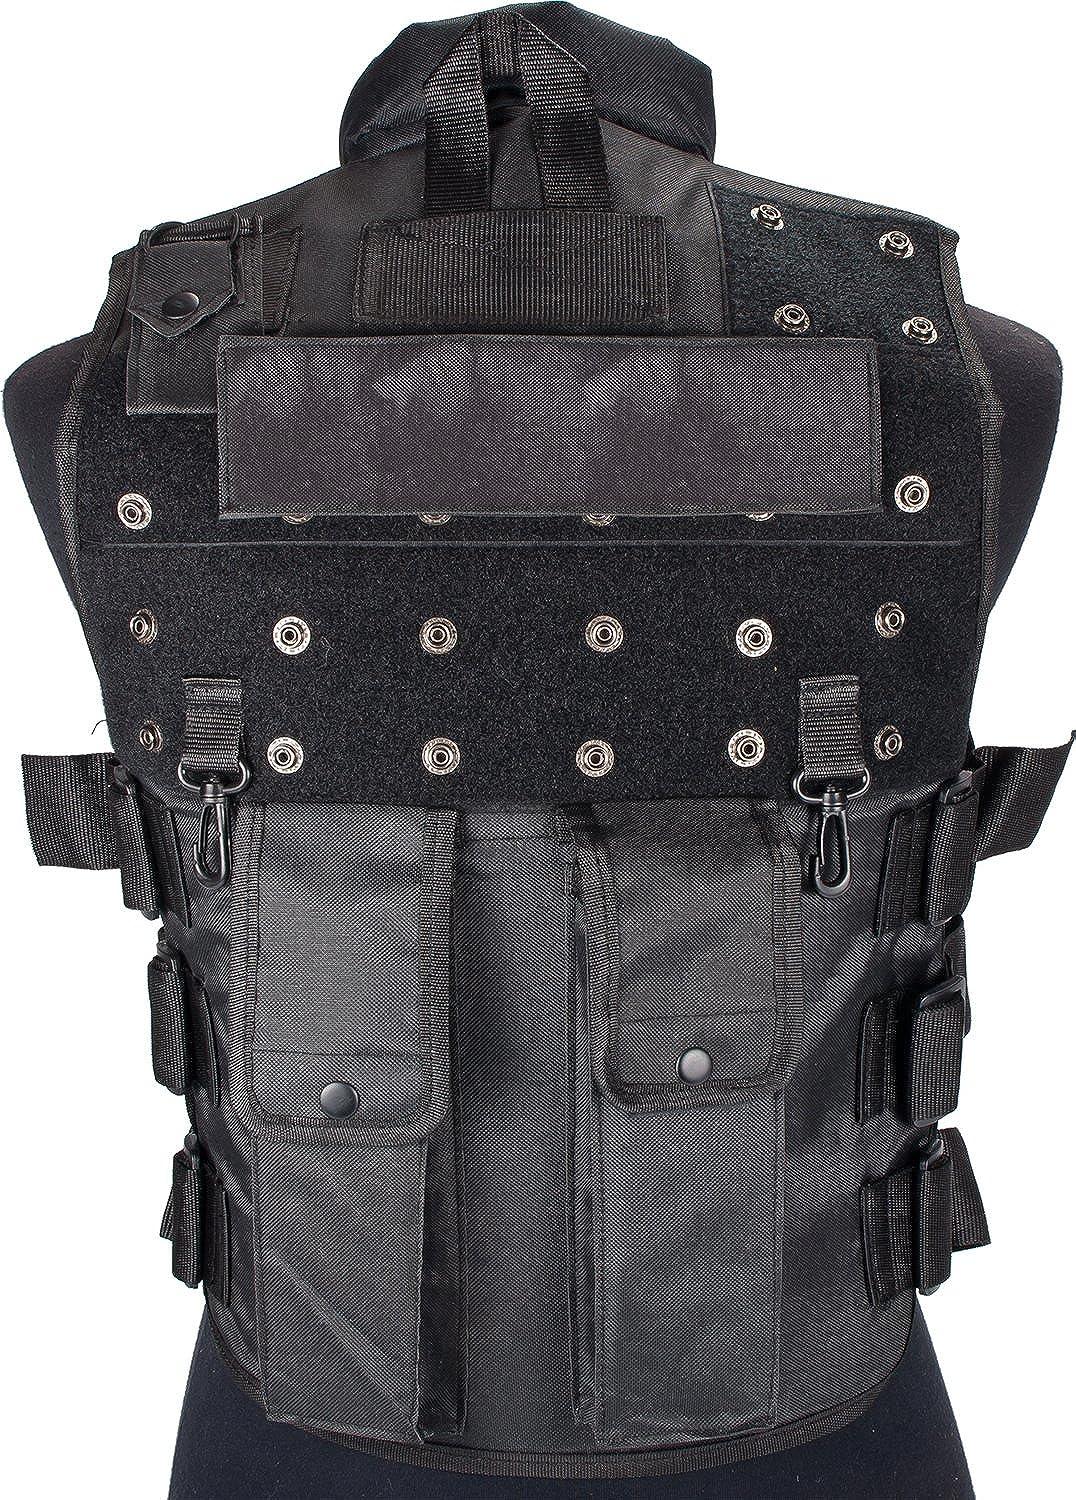 Evike - Fire Dragon Replica Tactical Vest w/Patches